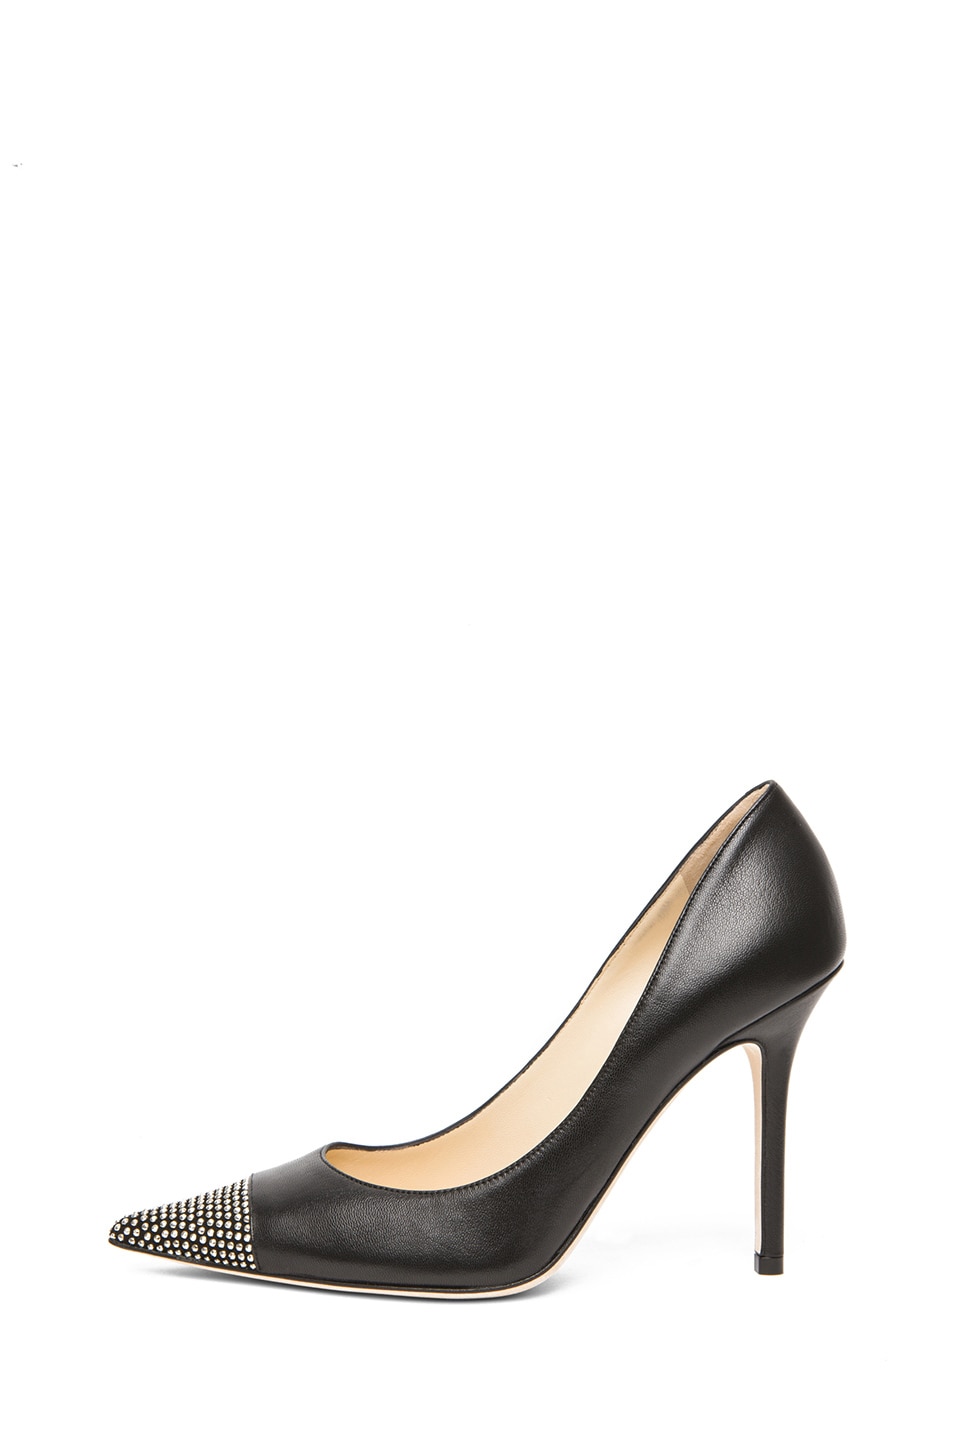 Image 1 of Jimmy Choo Amika Nappa Leather Studded Toe Pump in Black & Silver